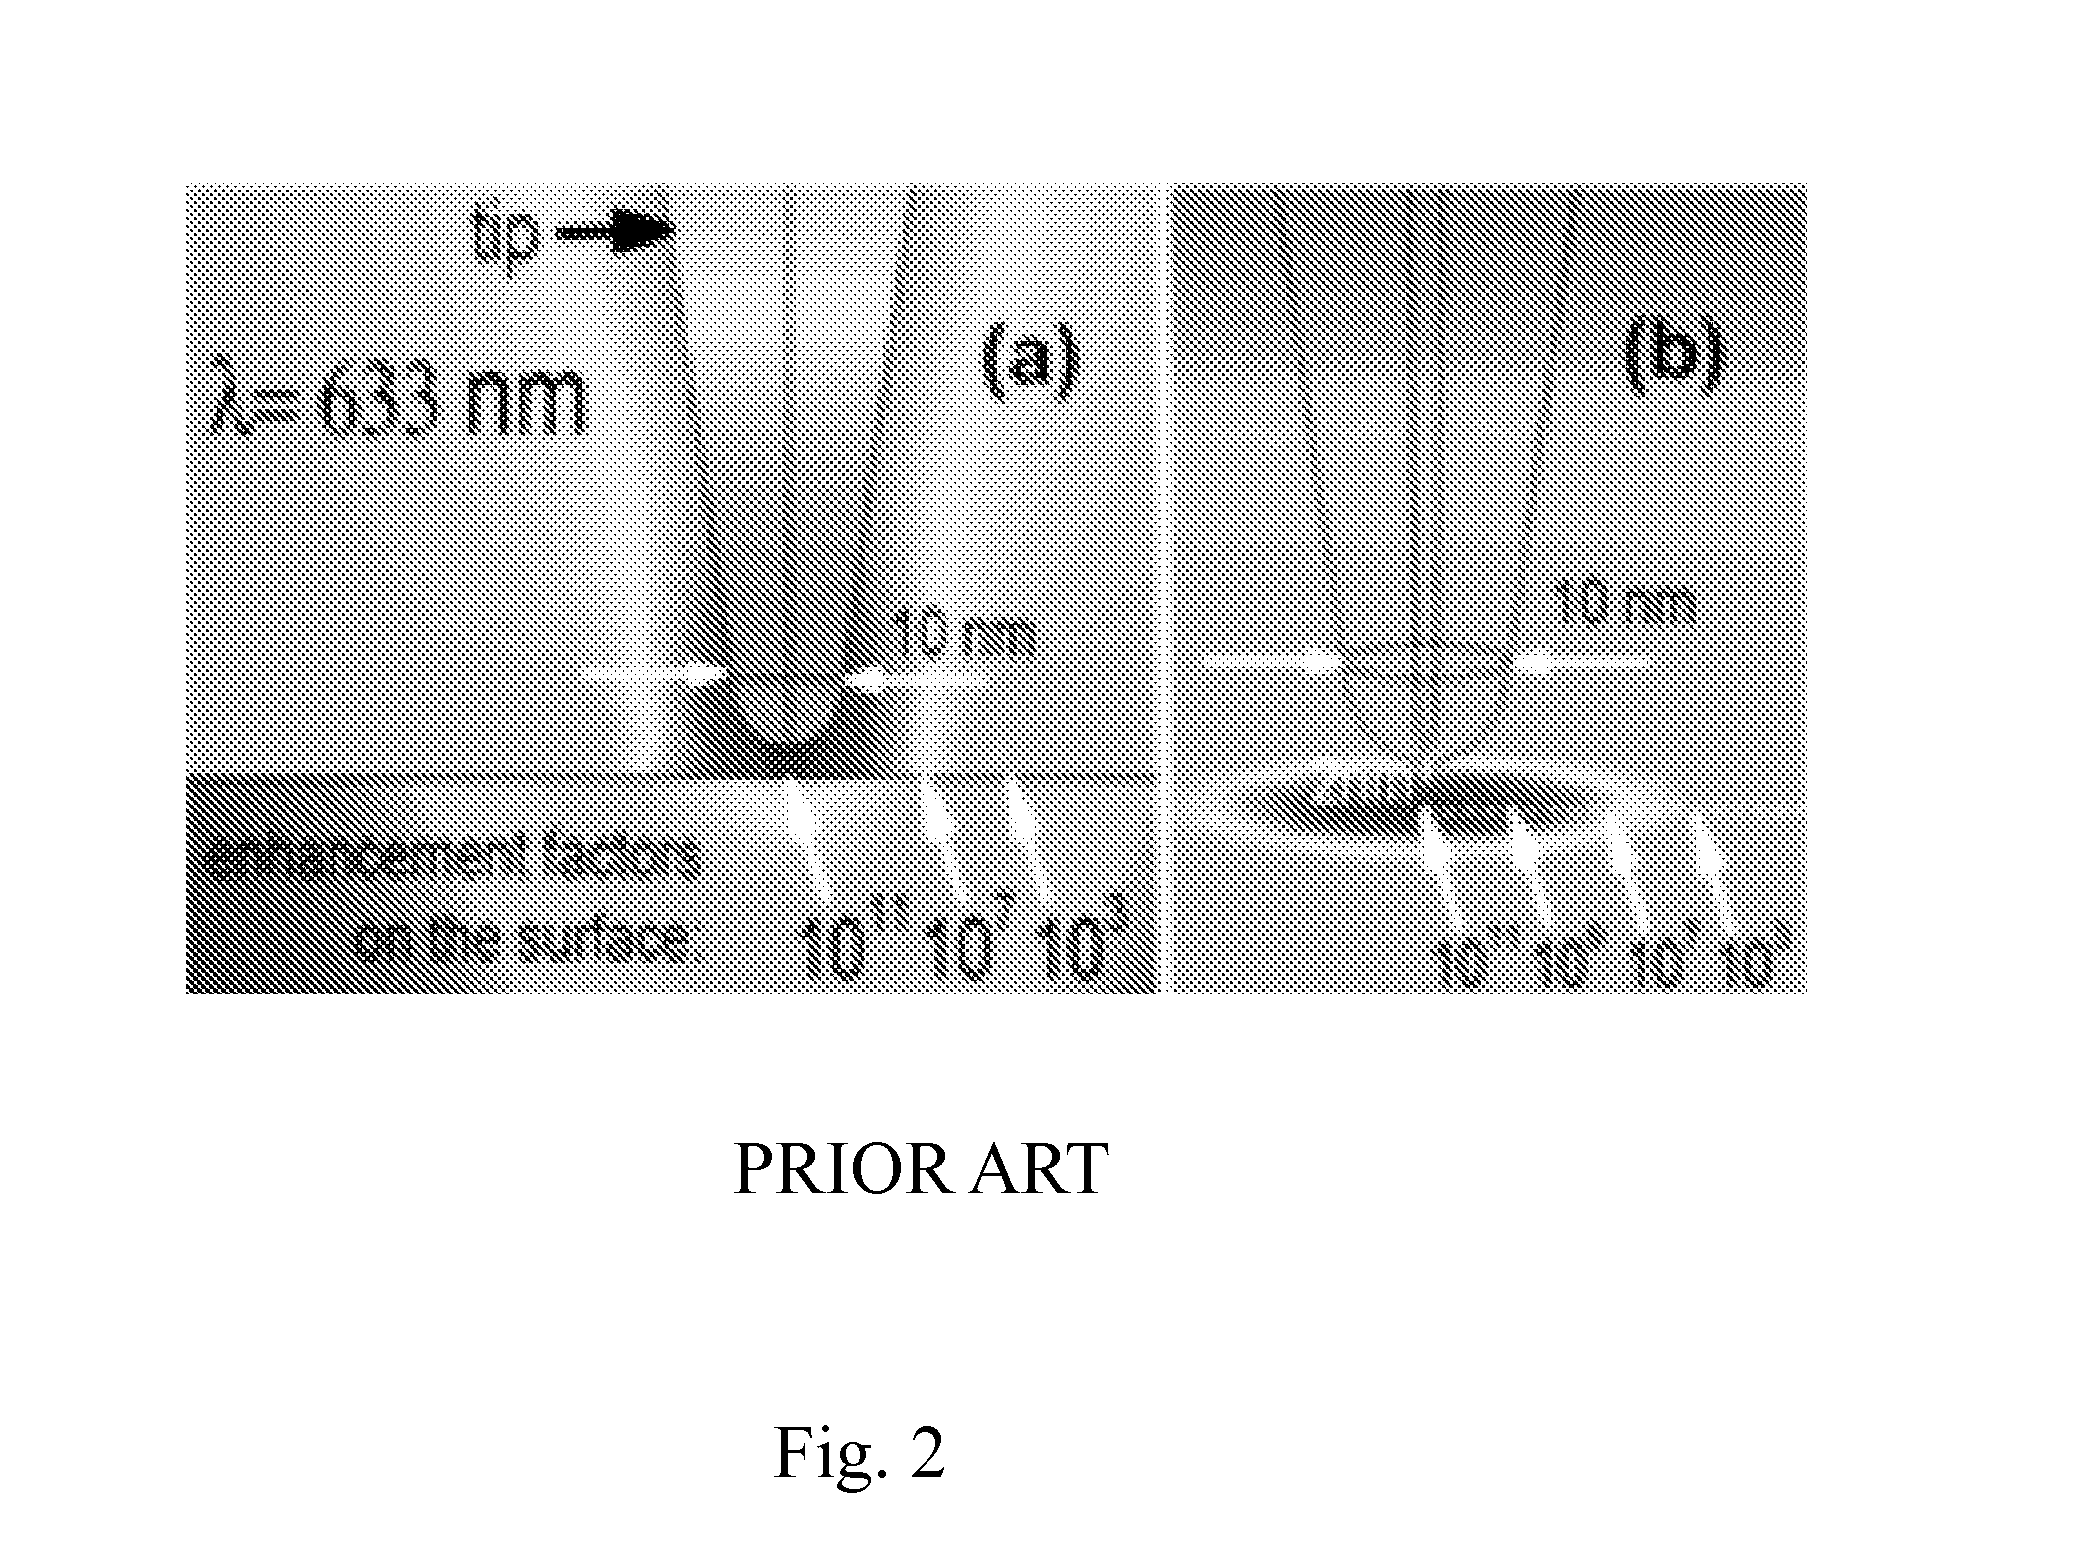 Thermal-energy producing system and method